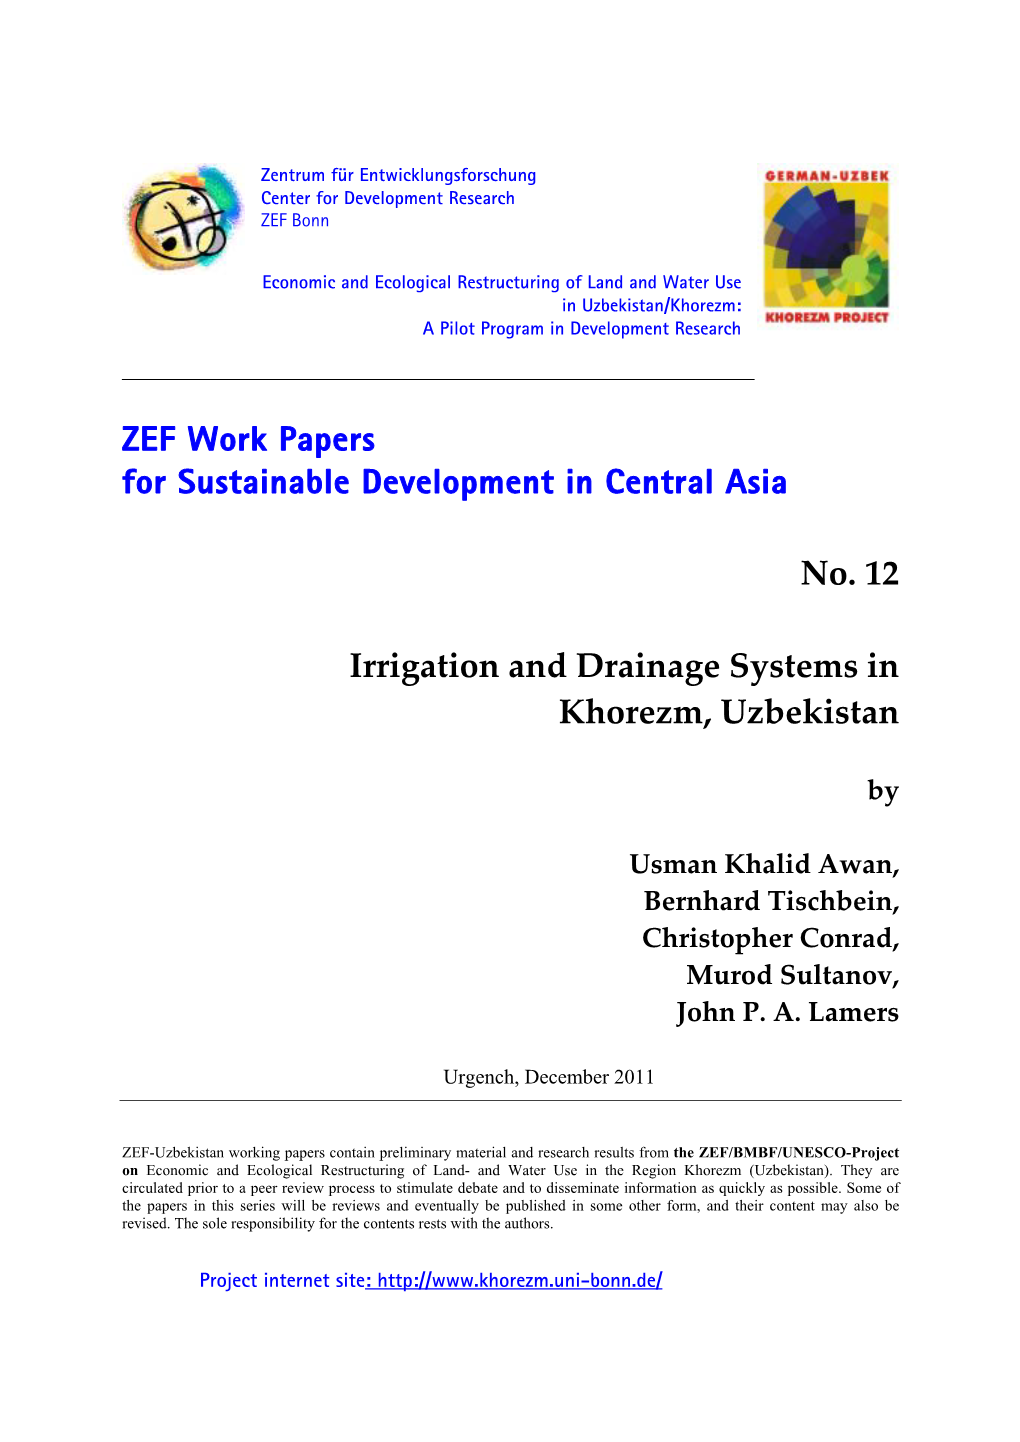 ZEF Work Papers for Sustainable Development in Central Asia No. 12